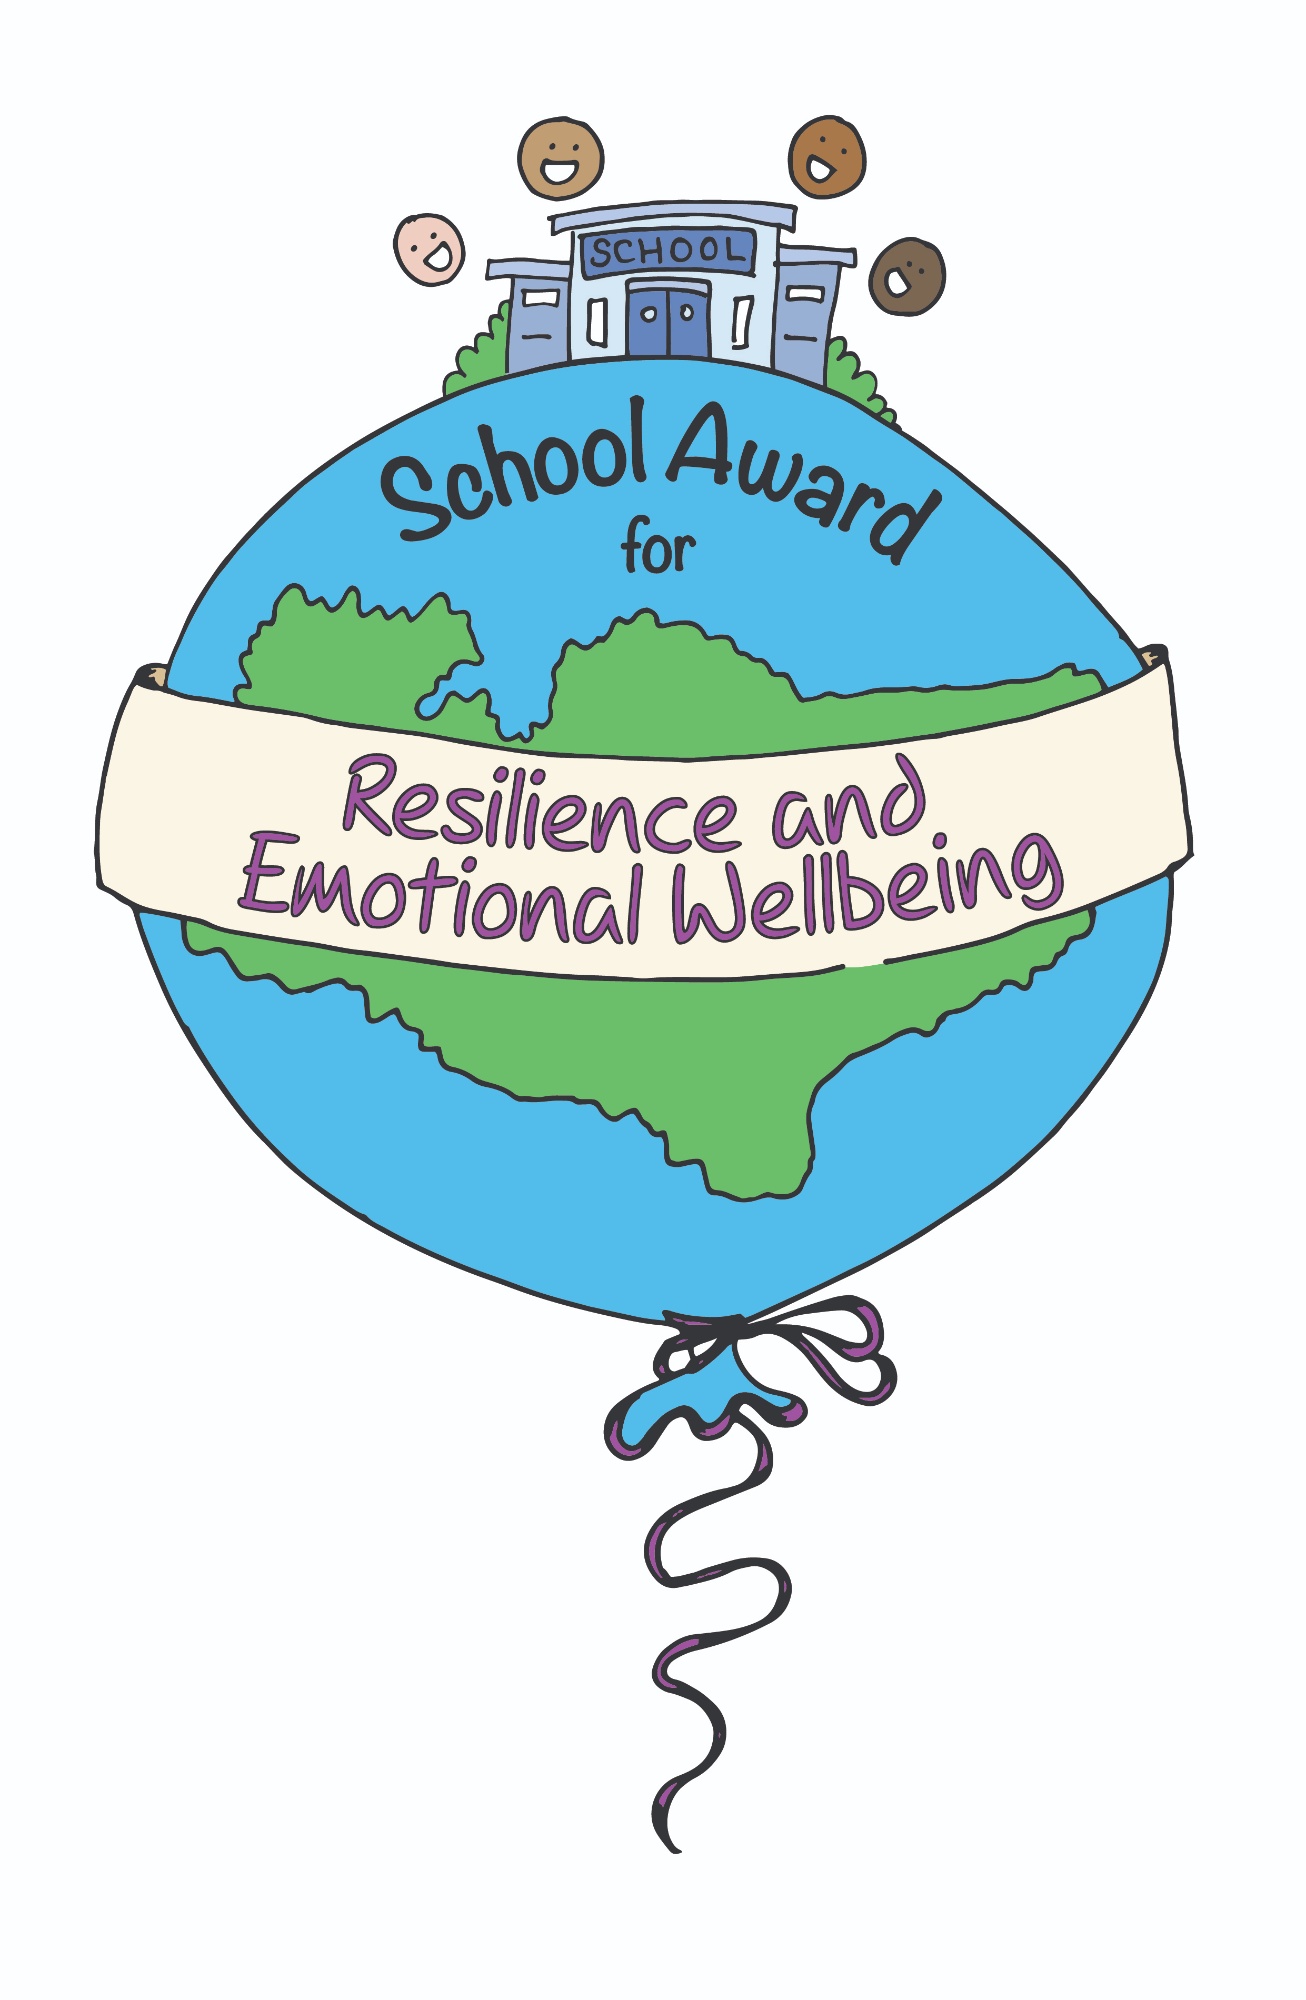 Kent Award for Resilience and Emotional Wellbeing